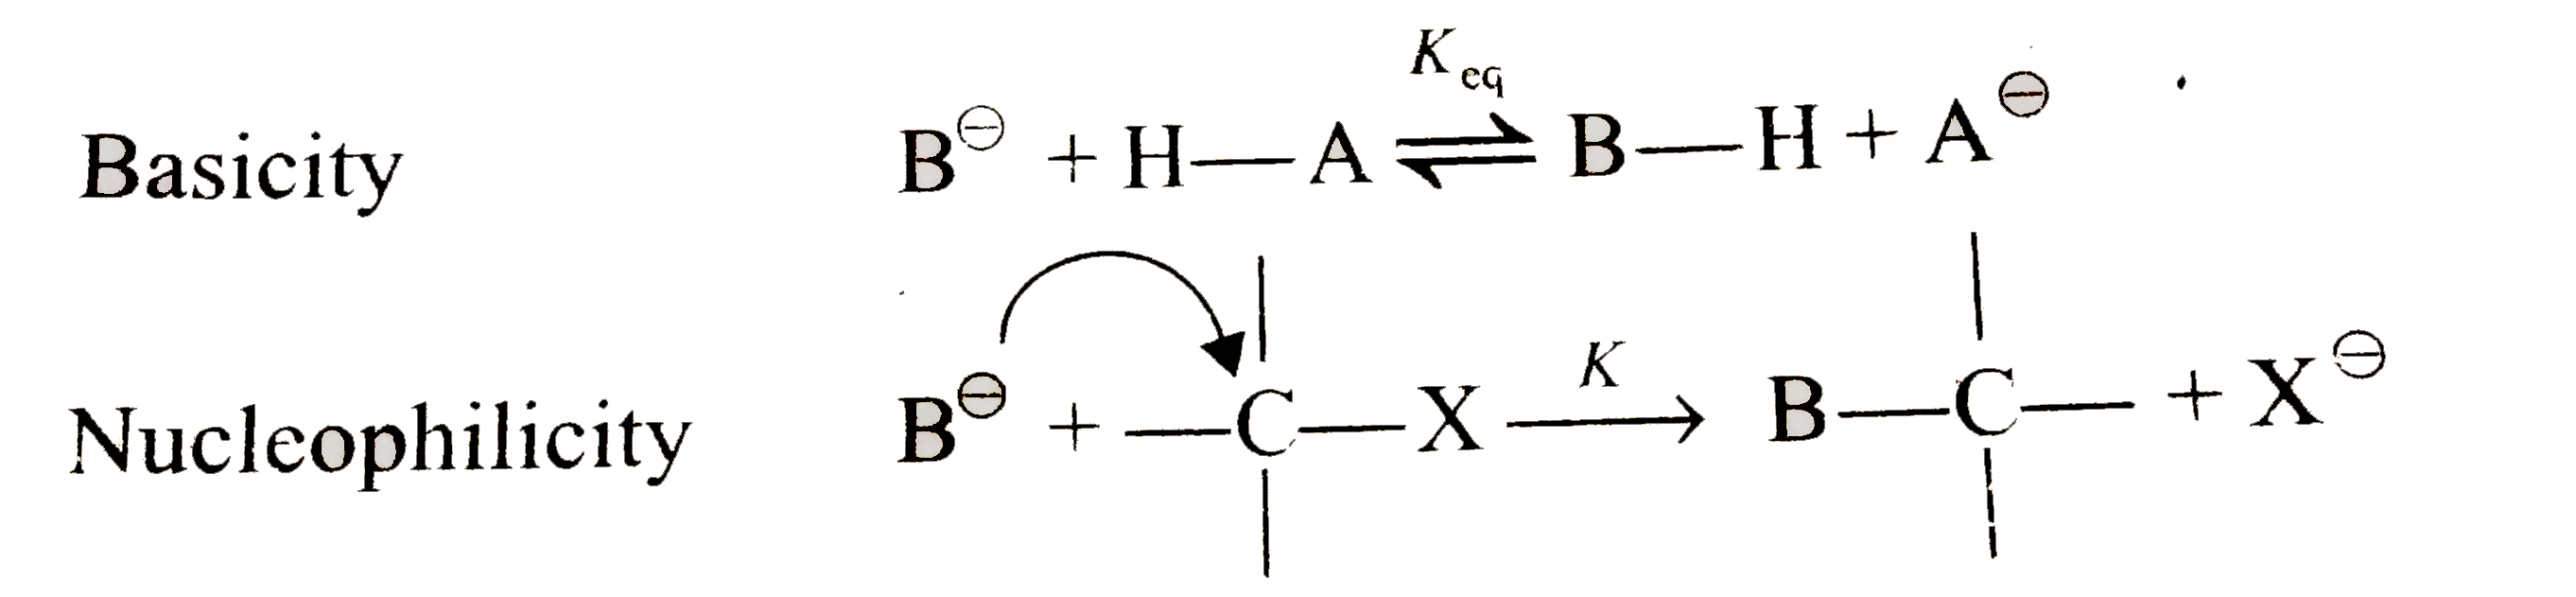 Basicity is defined by equilibrium constant for abstracting a proton. Nucleophilicity is defined by rate of attack on an electrophilic carbon atom,      A species with a negative charge is stronger nucleophile than similar neutral species.Nucleophilicity decreases form left to right in periodic table and increases down the group in periodic table. As the size of similar type of negatively charged species increases, basicity increases and nuleophilicity decreases.   Which of the following negatively charged species has maximum basic character?